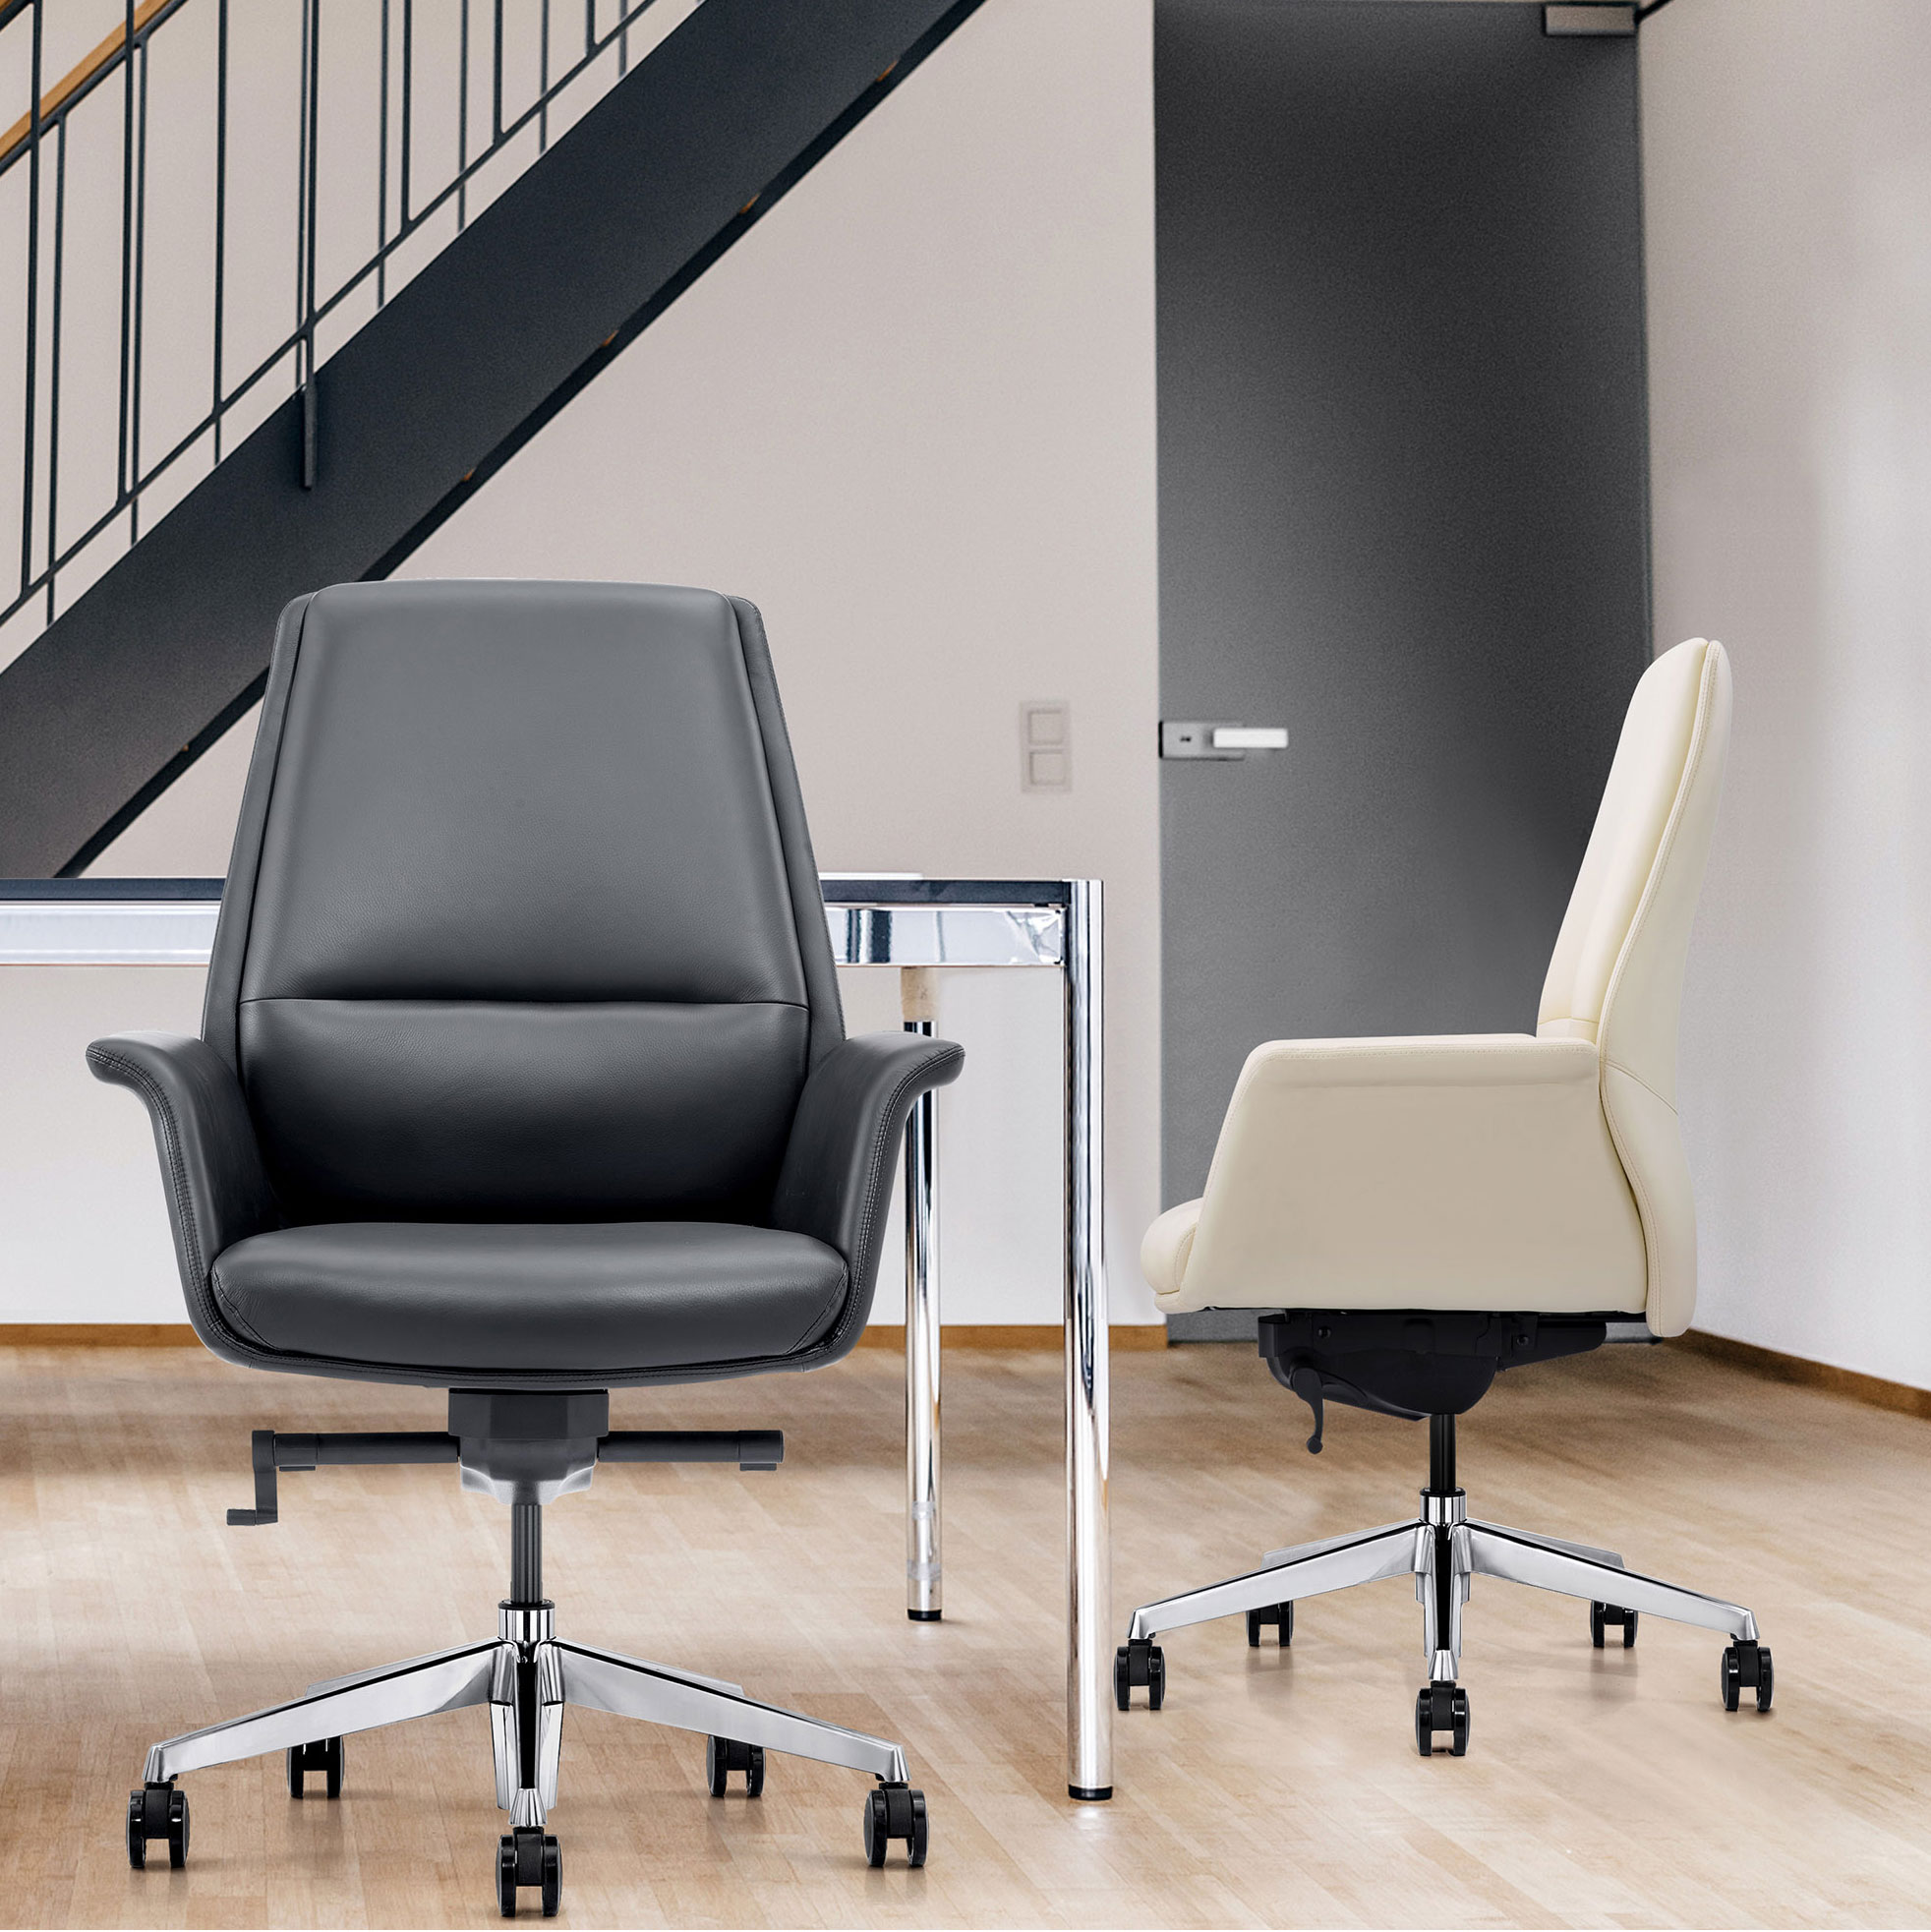 LOD85 Leather Home Office Chairs Shown in Black and Off-White